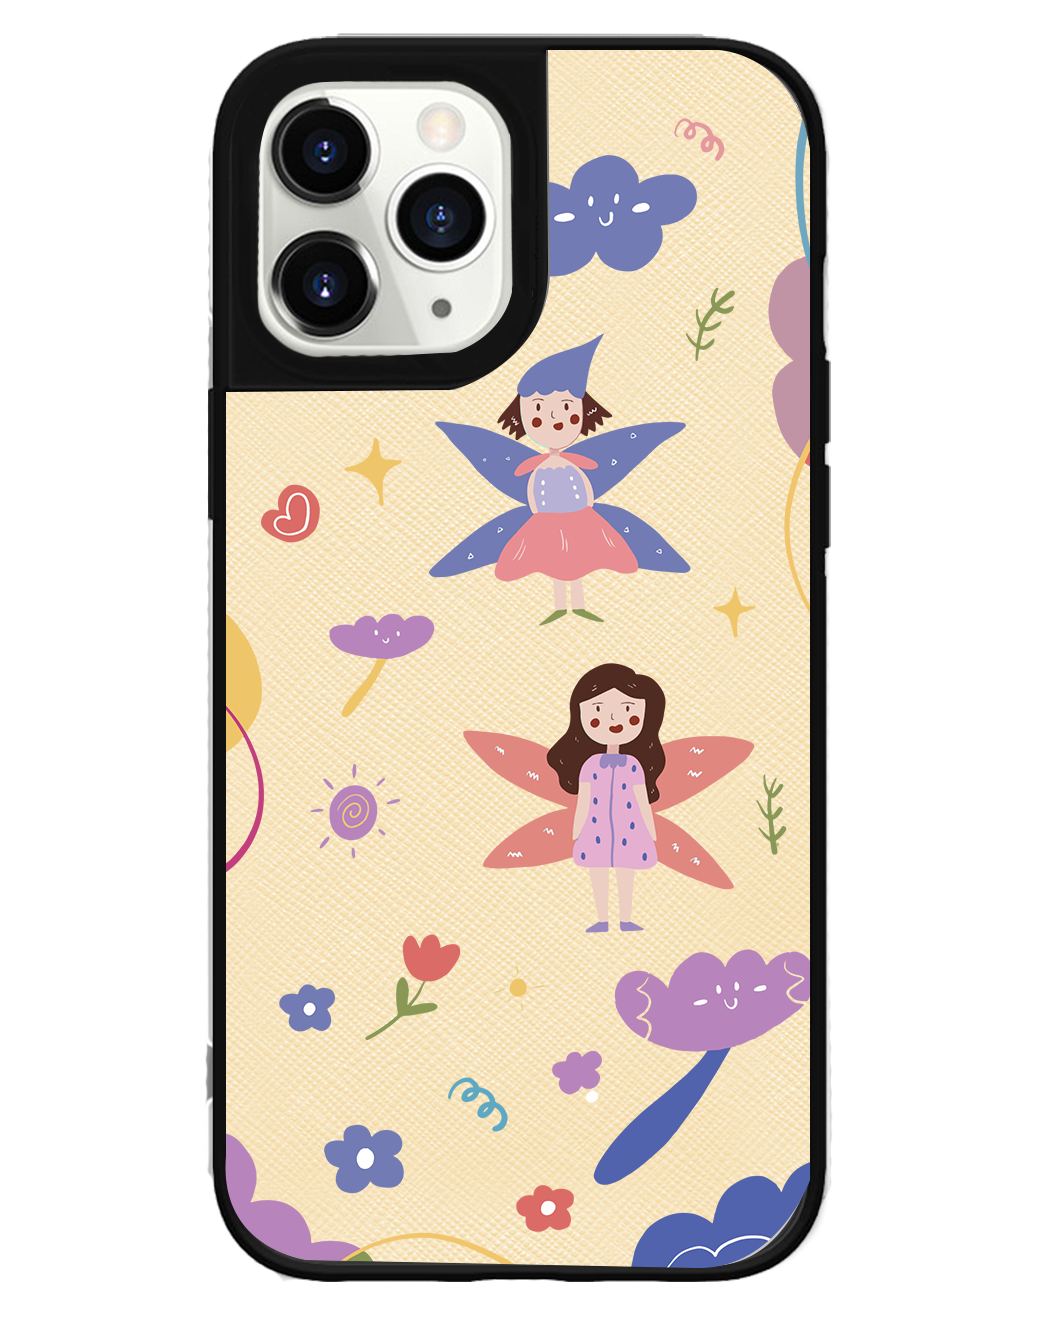 iPhone Leather Grip Case - Fairy Pattern